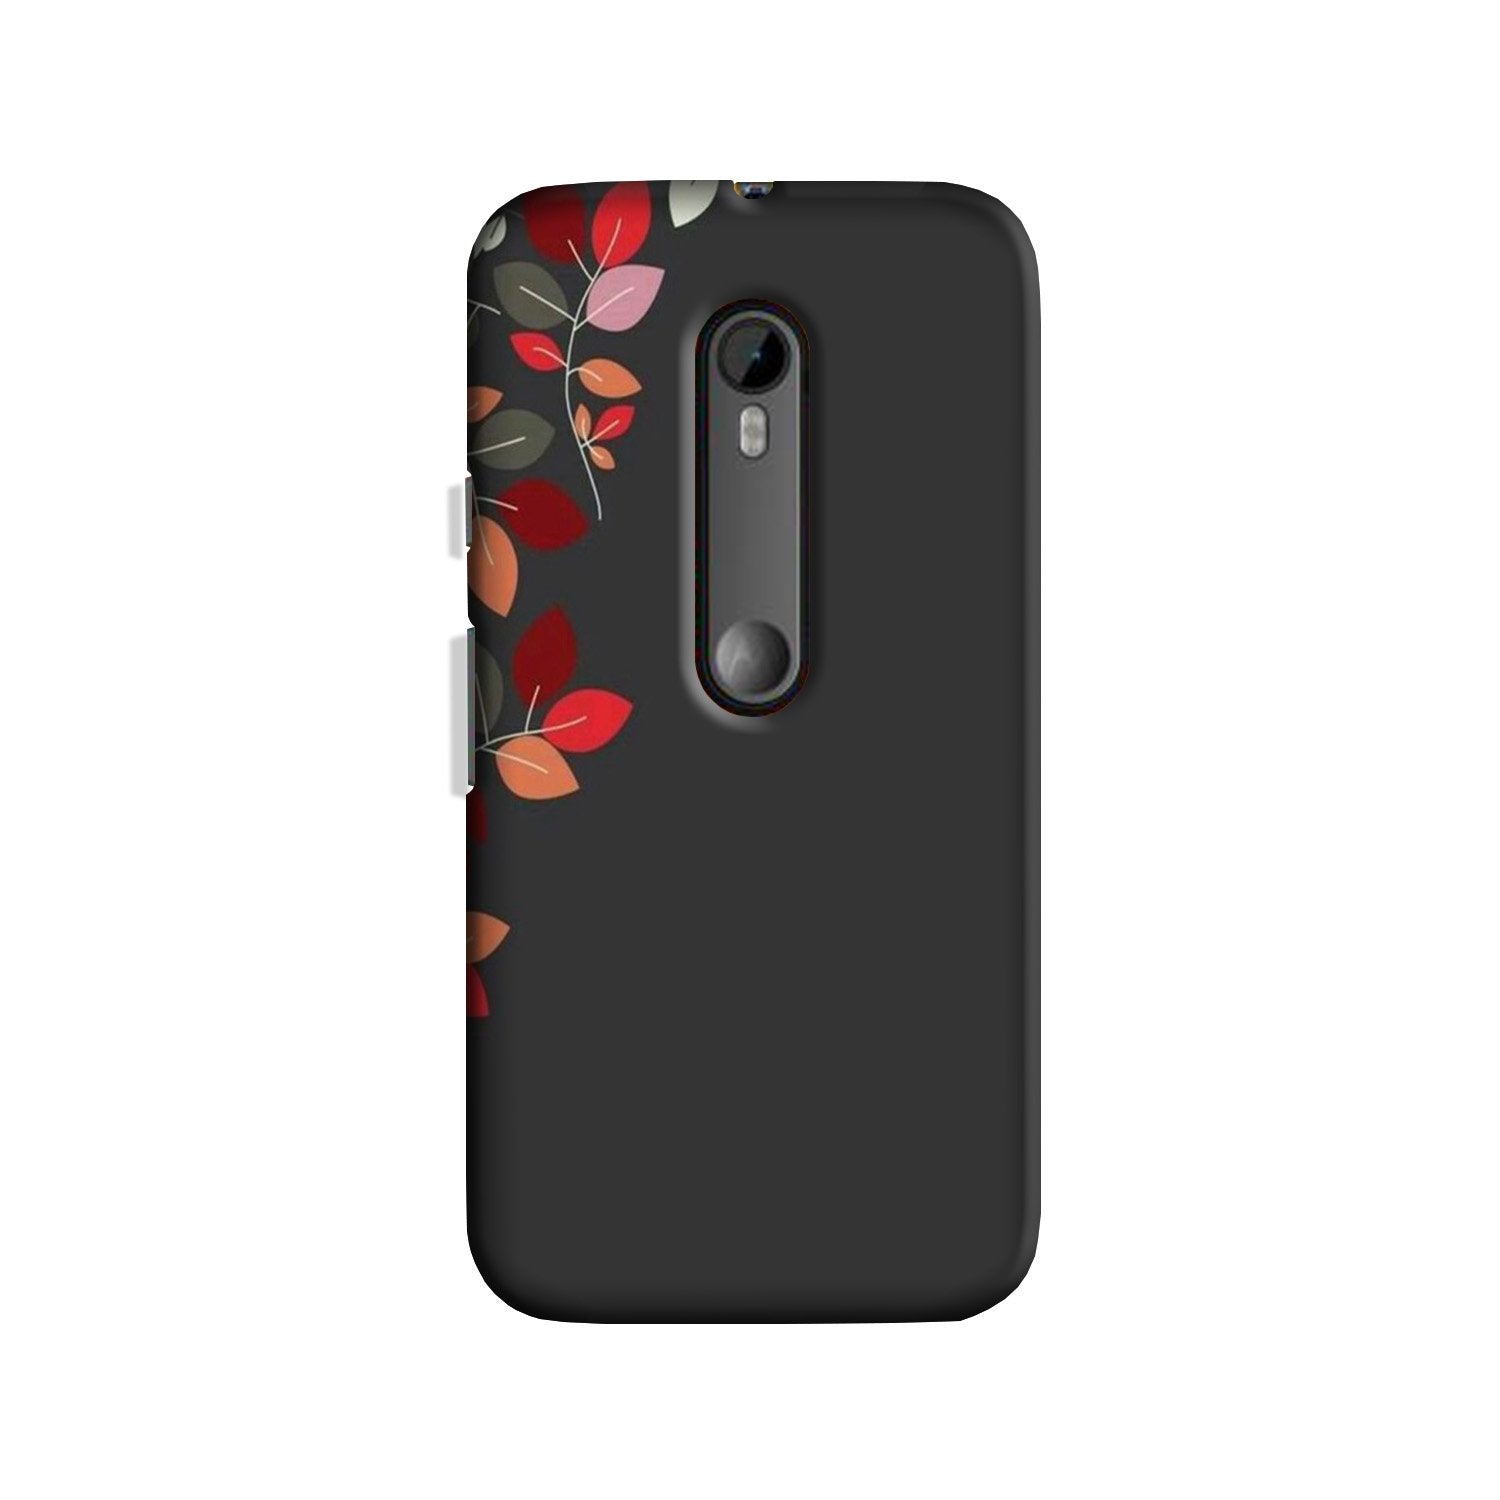 Grey Background Case for Moto X Force